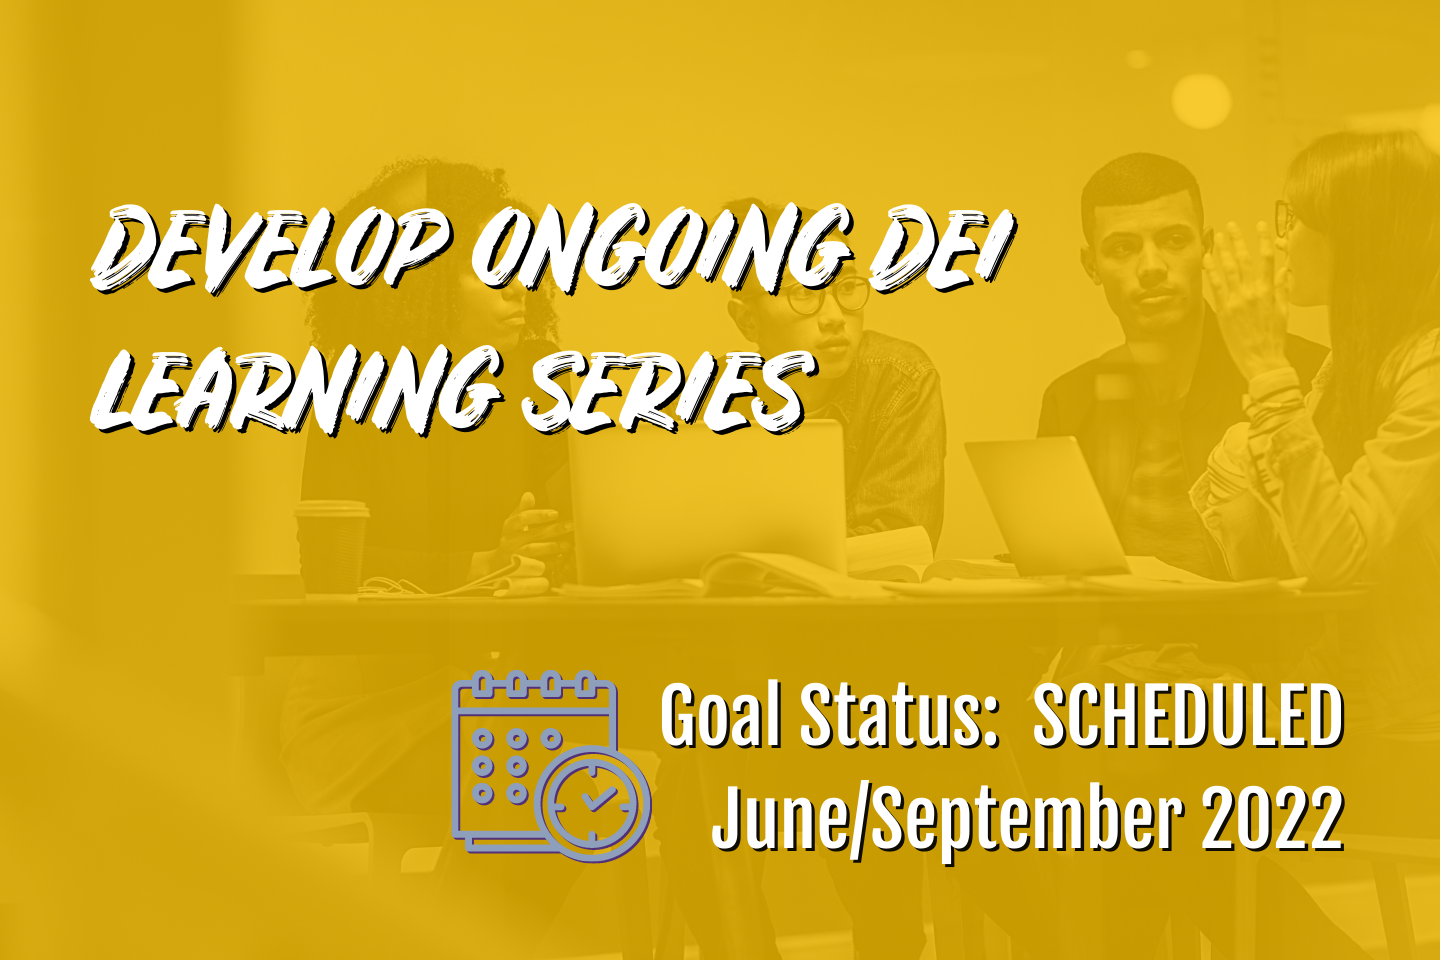 Develop ongoing DEI learning series